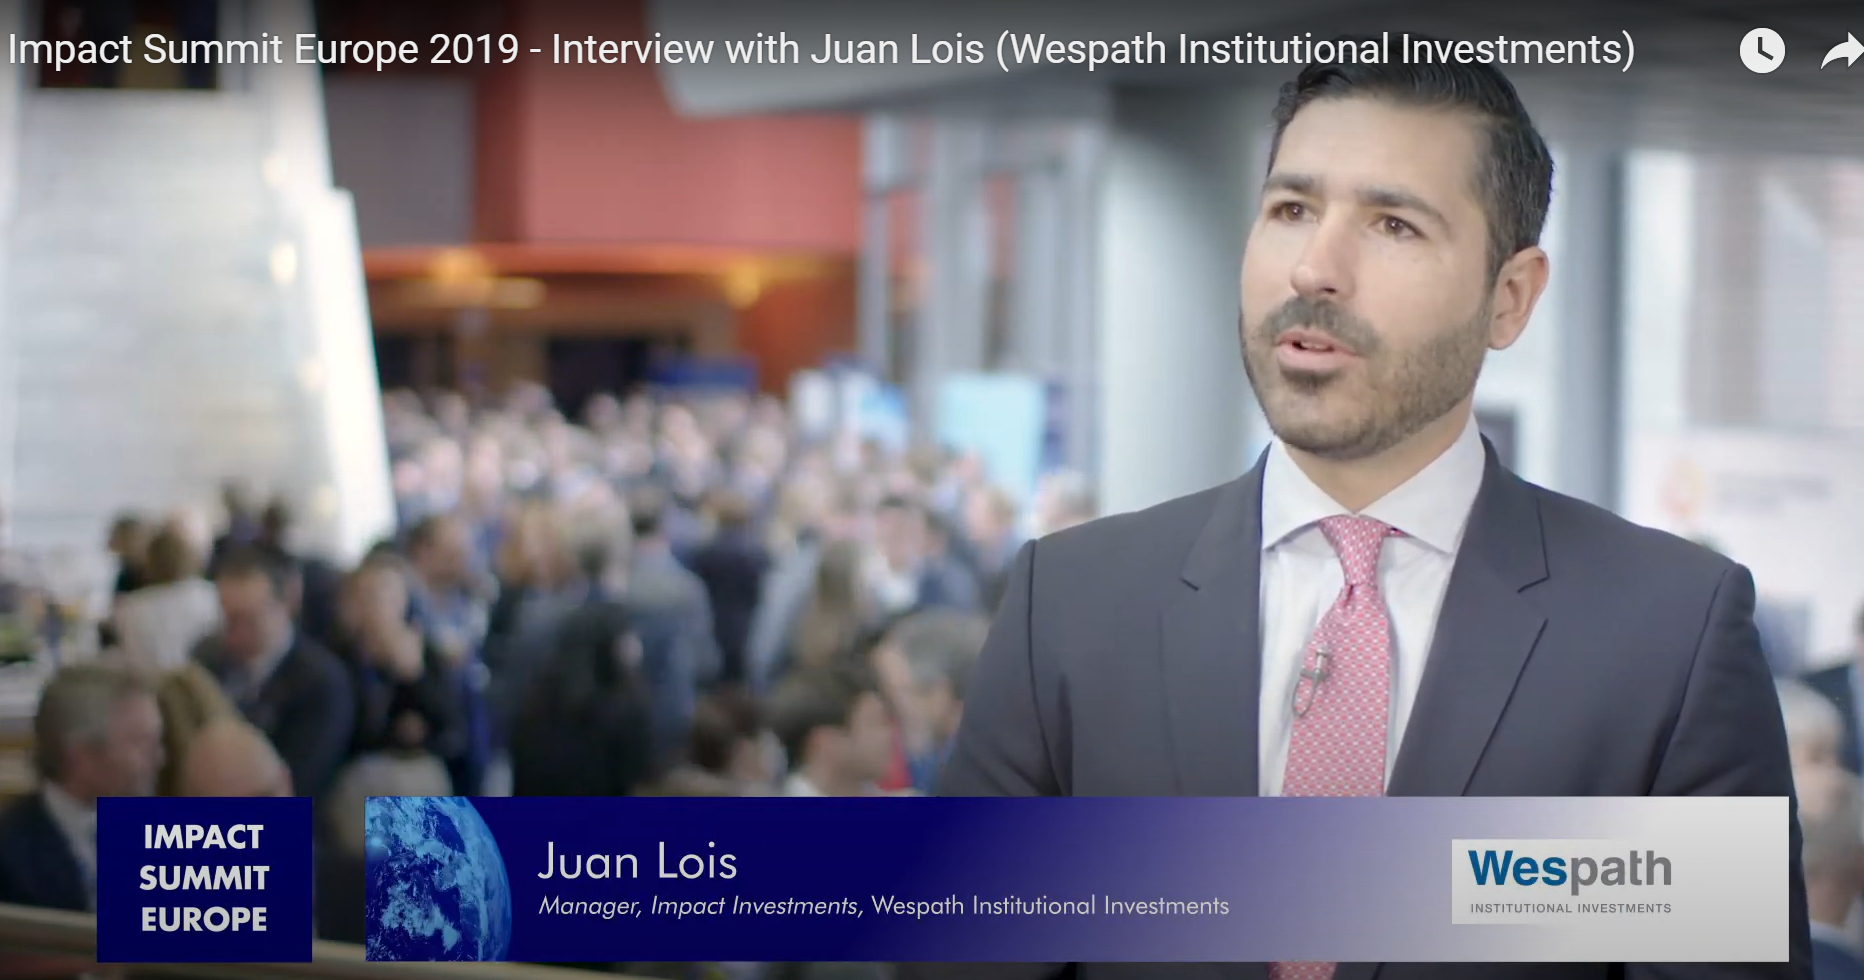 Juan Lois I Wespath Institutional Investments